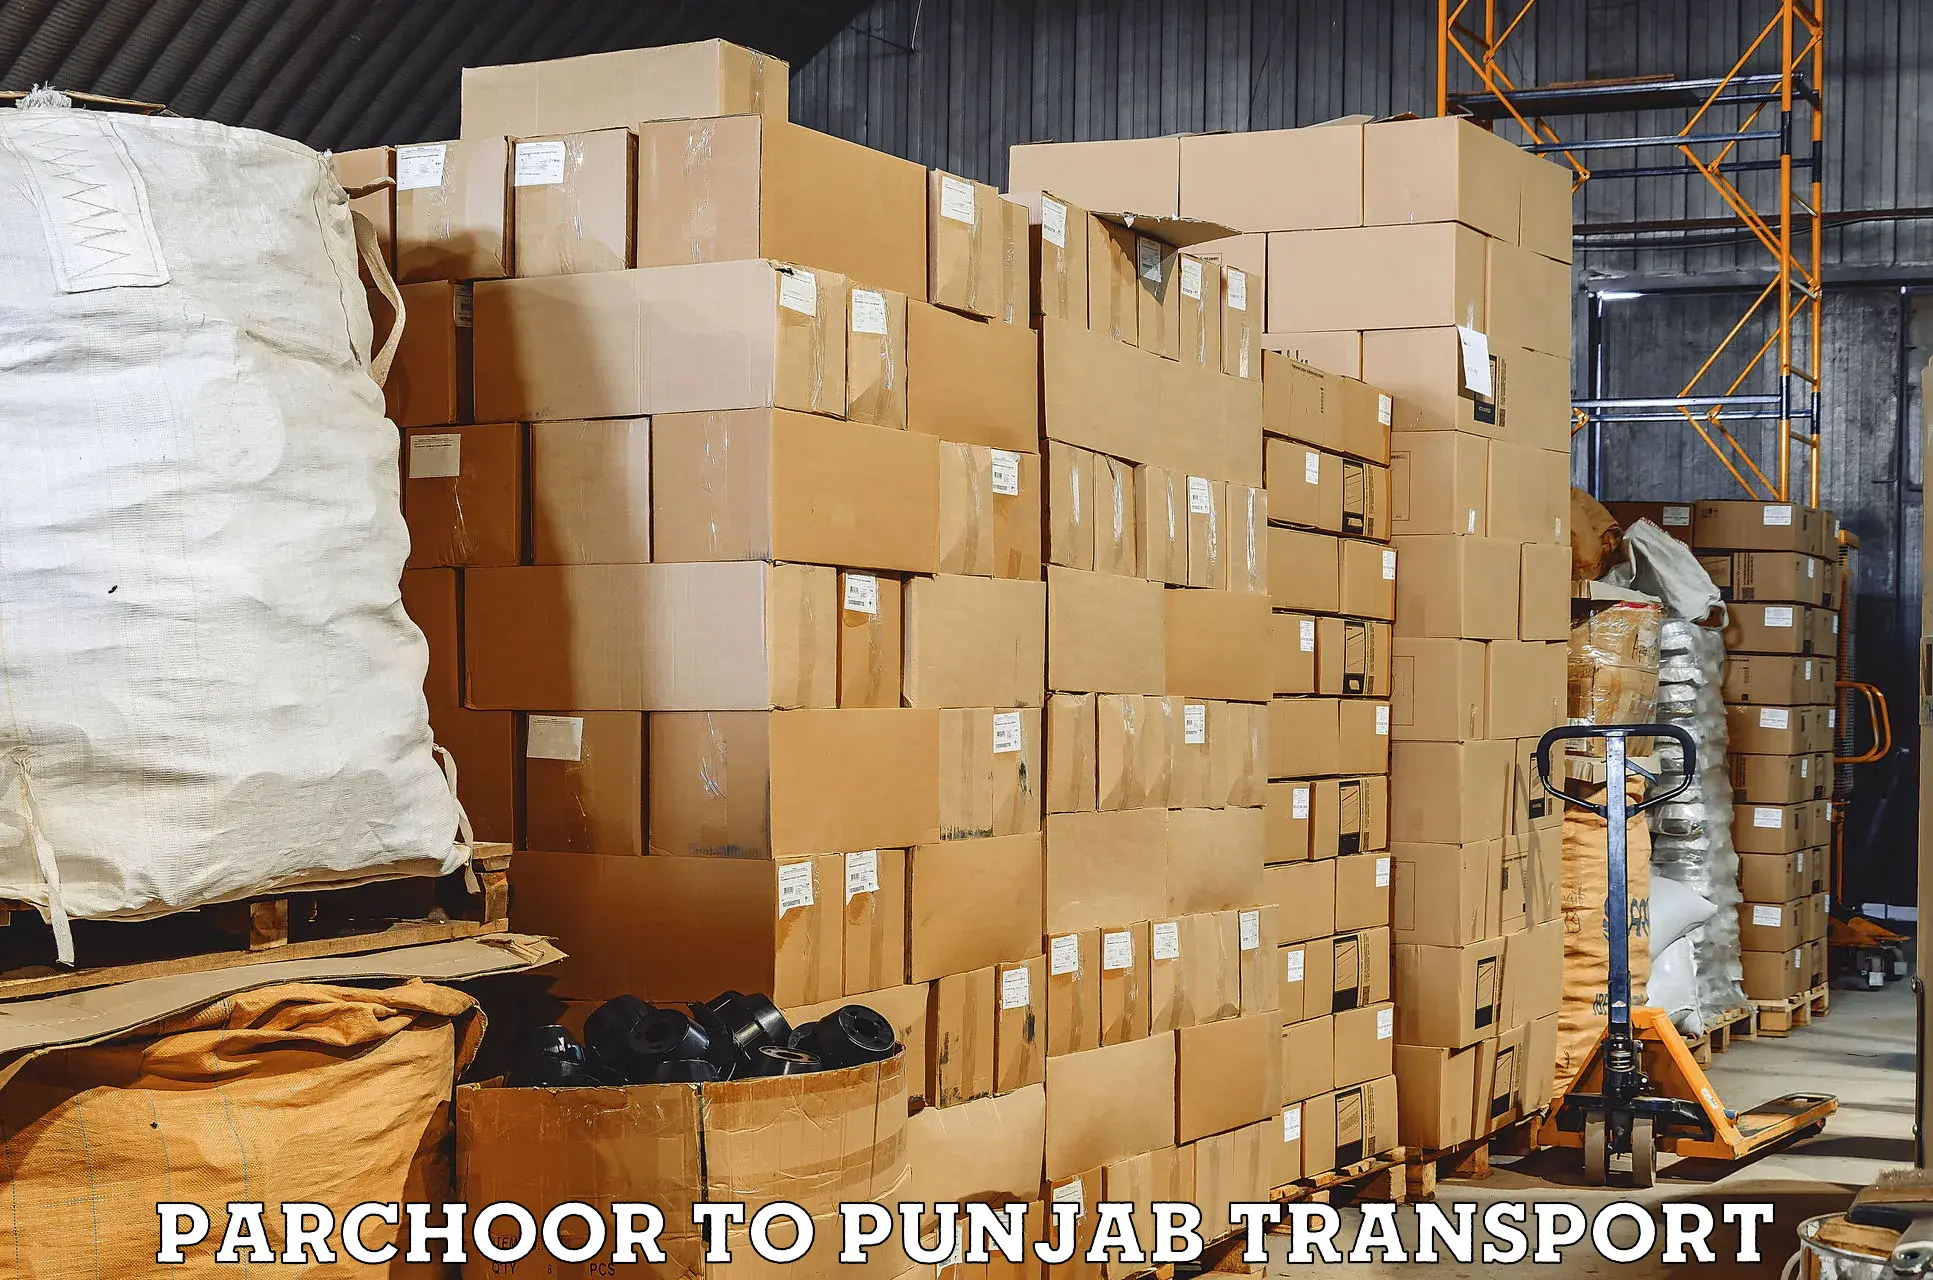 Cargo train transport services Parchoor to Pathankot